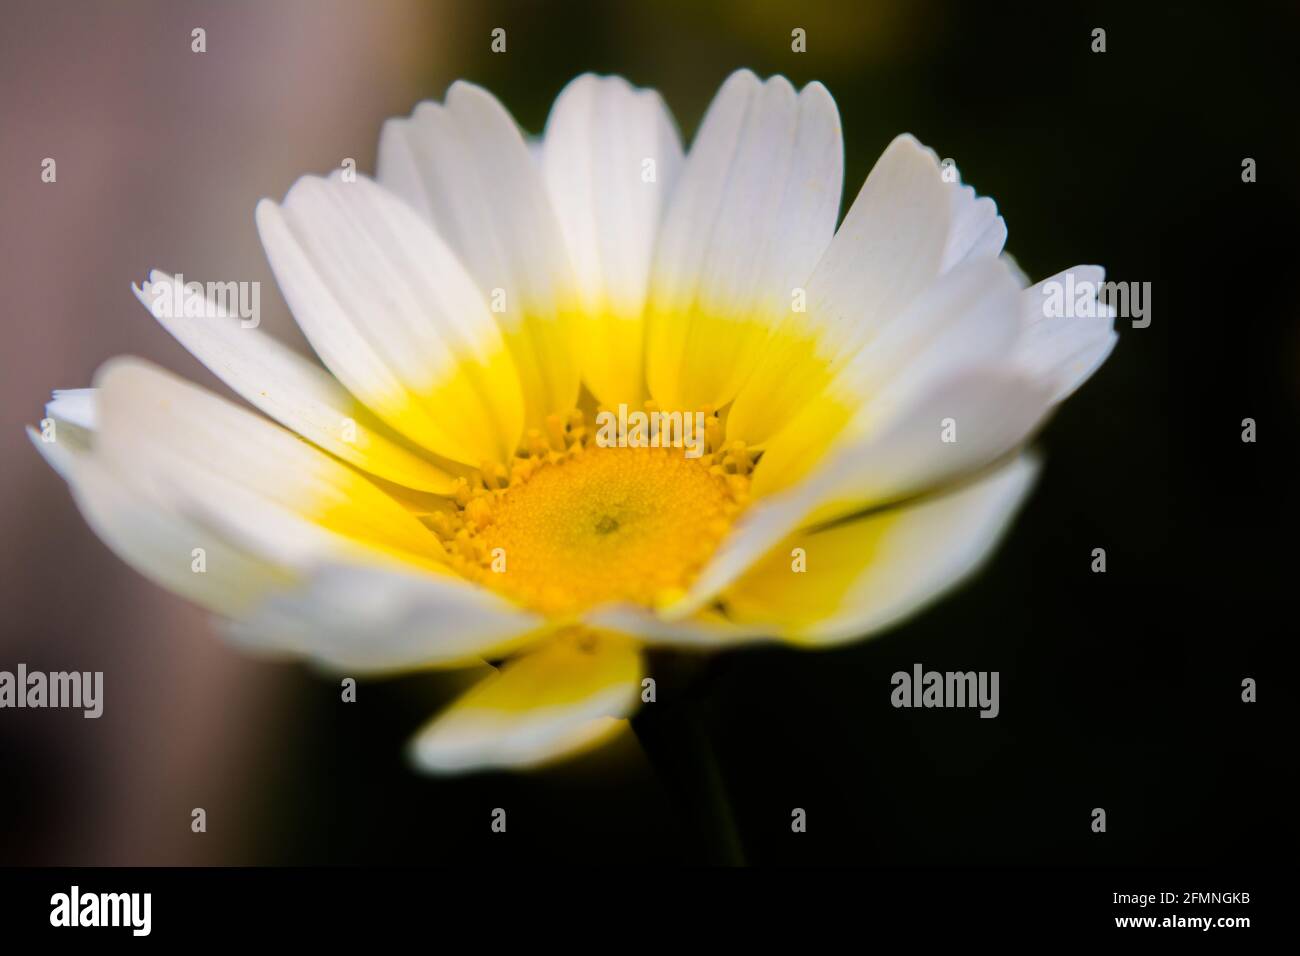 White Mexican sunflower weed (Tithonia diversifolia). Flower of yellow petals with selective focus. Stock Photo